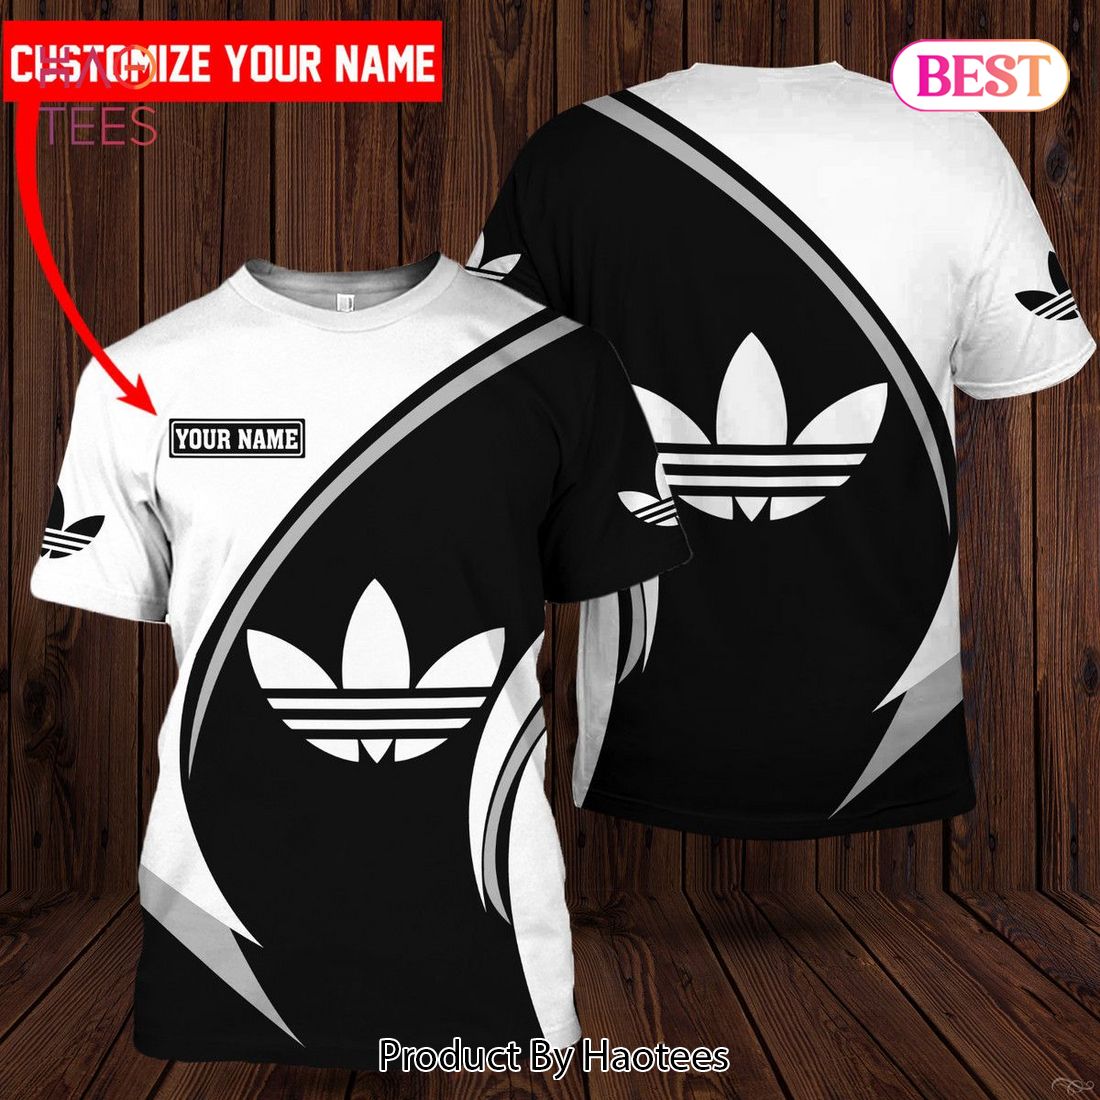 Adidas 3D T-Shirt Black White Luxury Brand Inspired 3D Personalized Customized